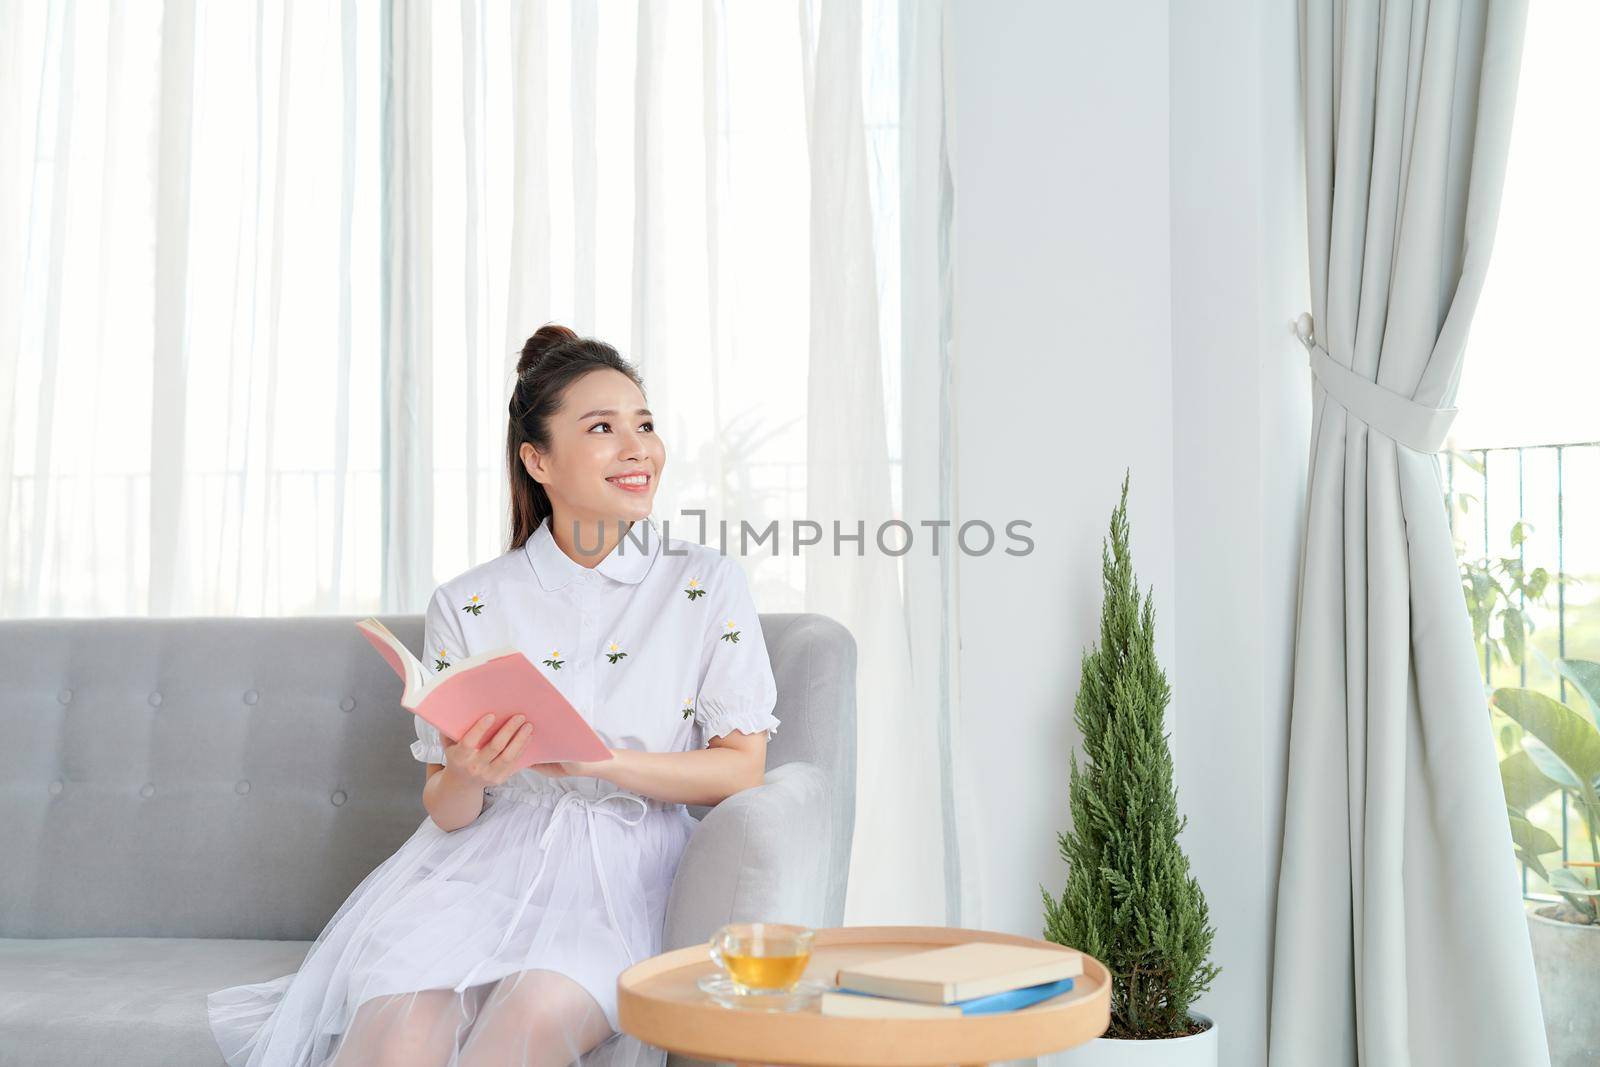 Portrait of a woman reading a book while relaxing on the couch